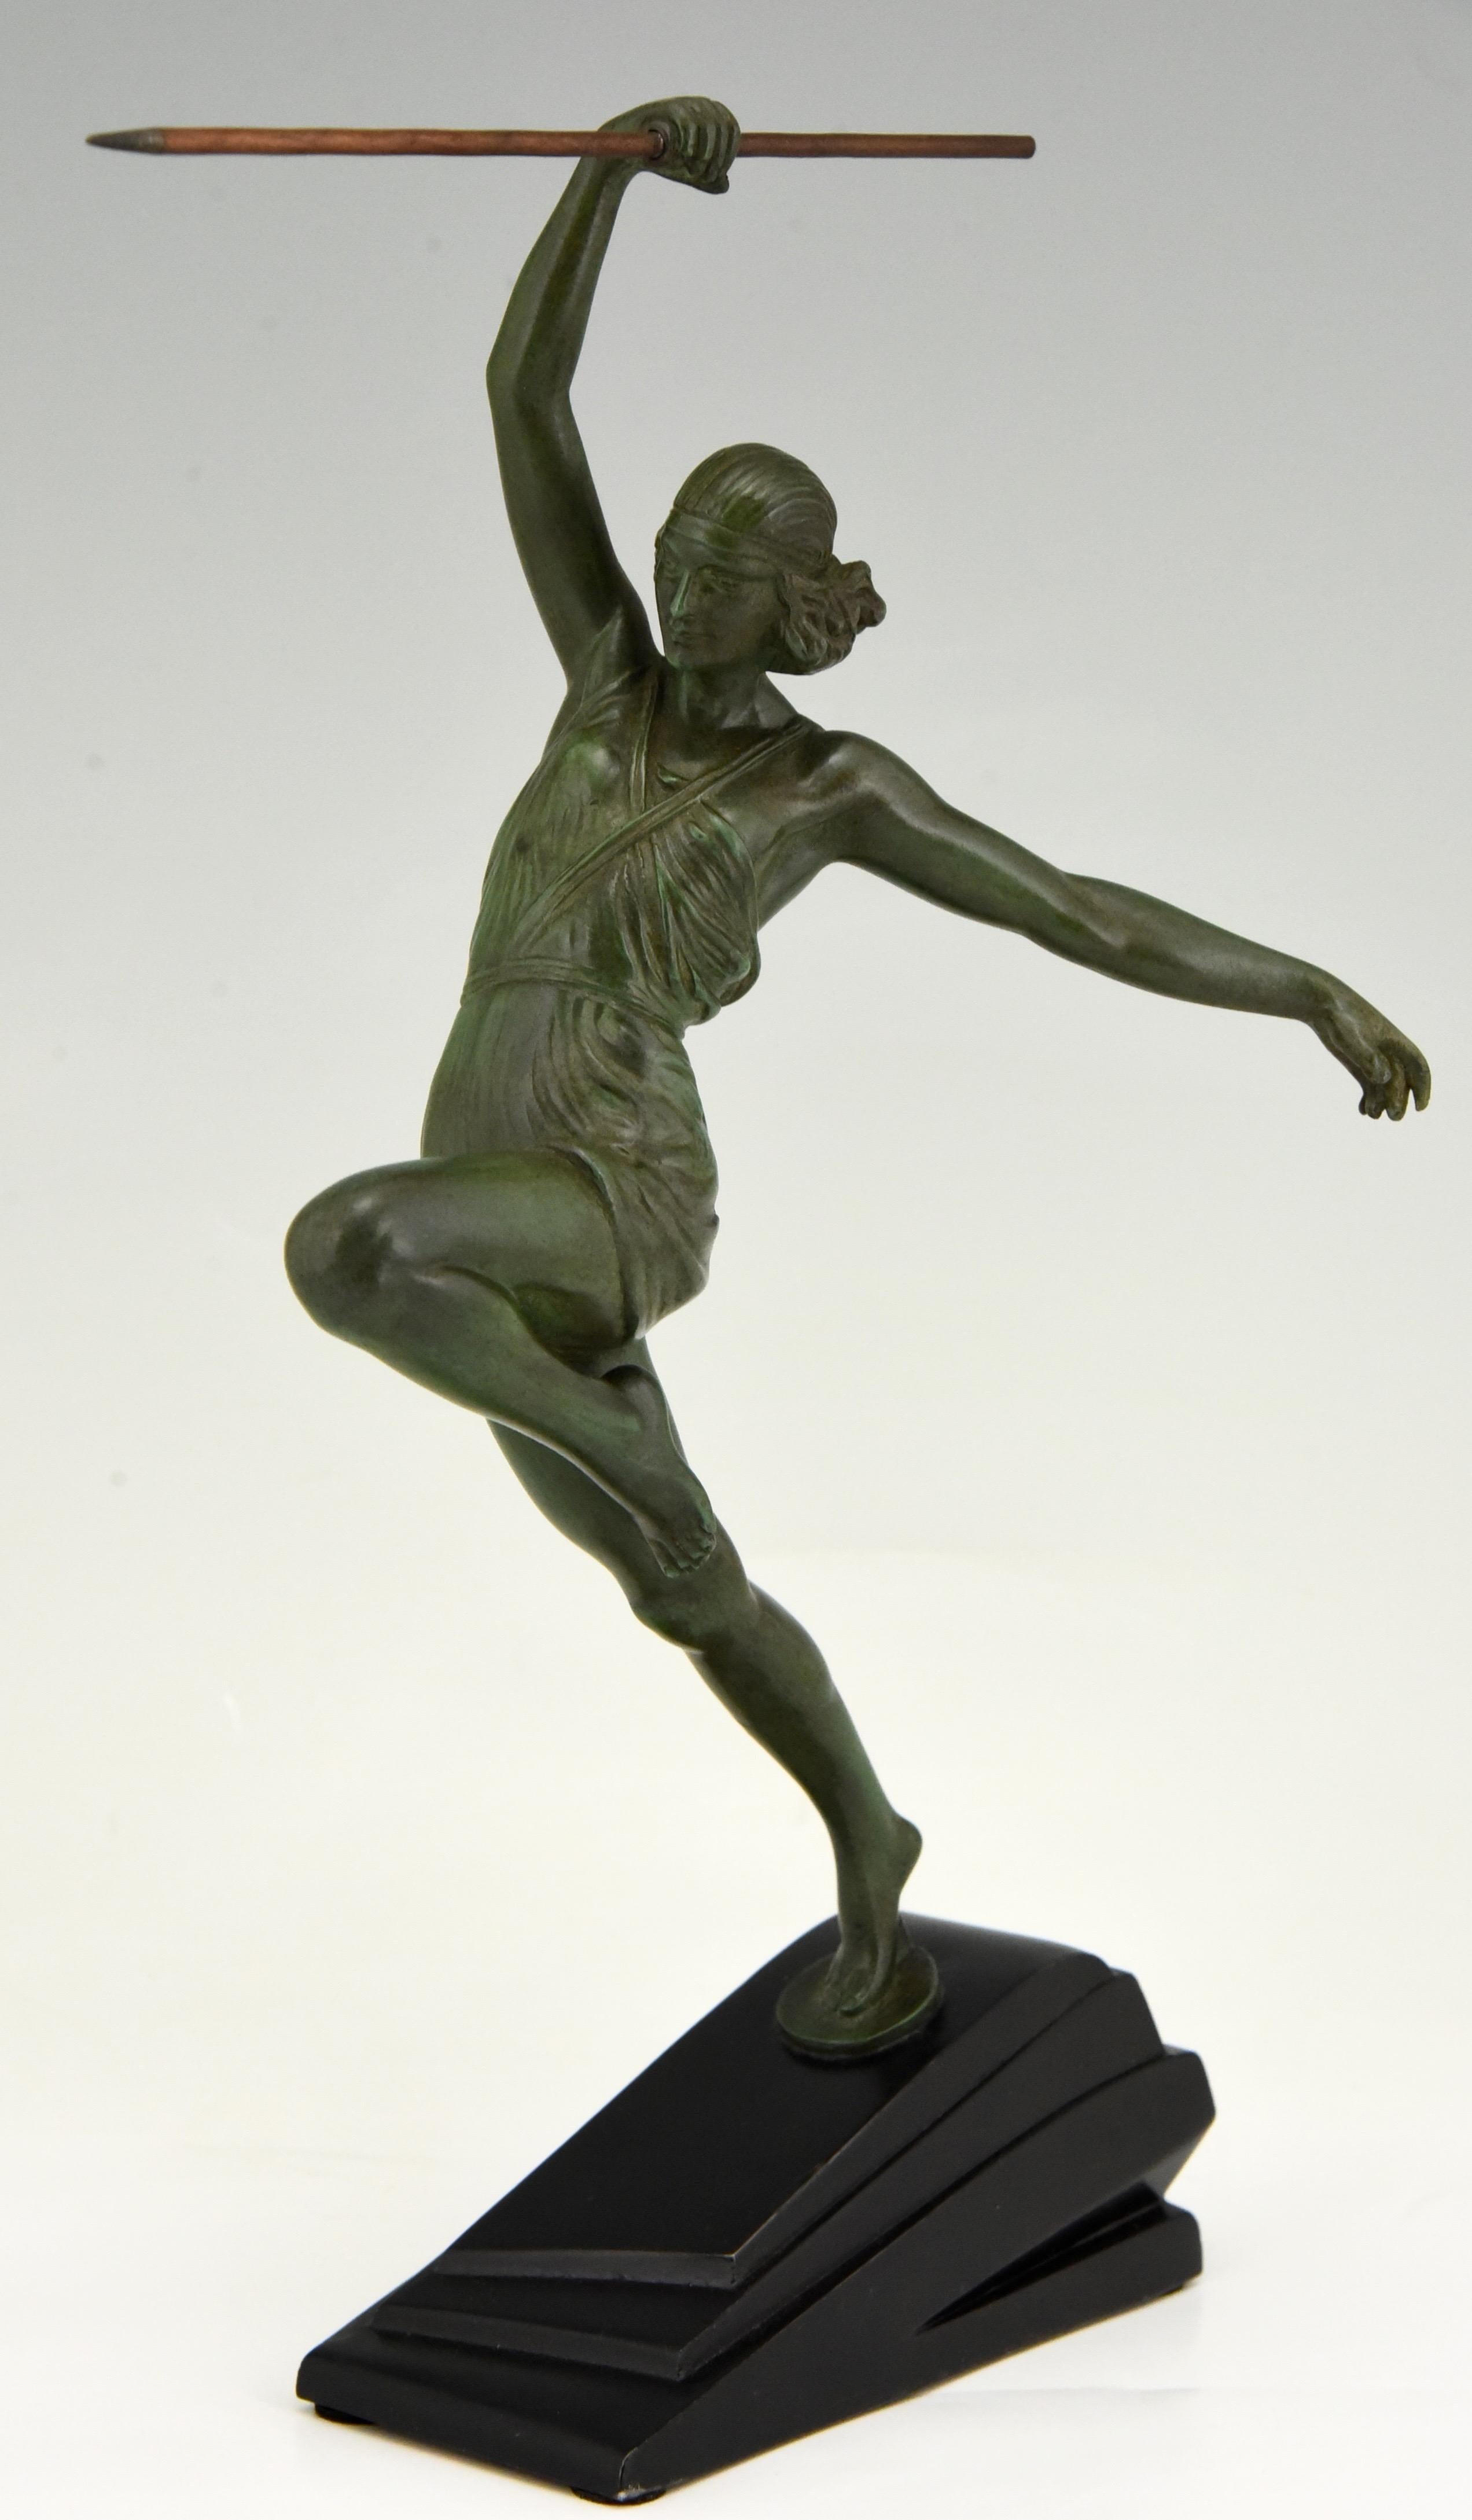 French Art Deco Sculpture Javelin Thrower Fayral, Pierre Le Faguays for Le Verrier 1930